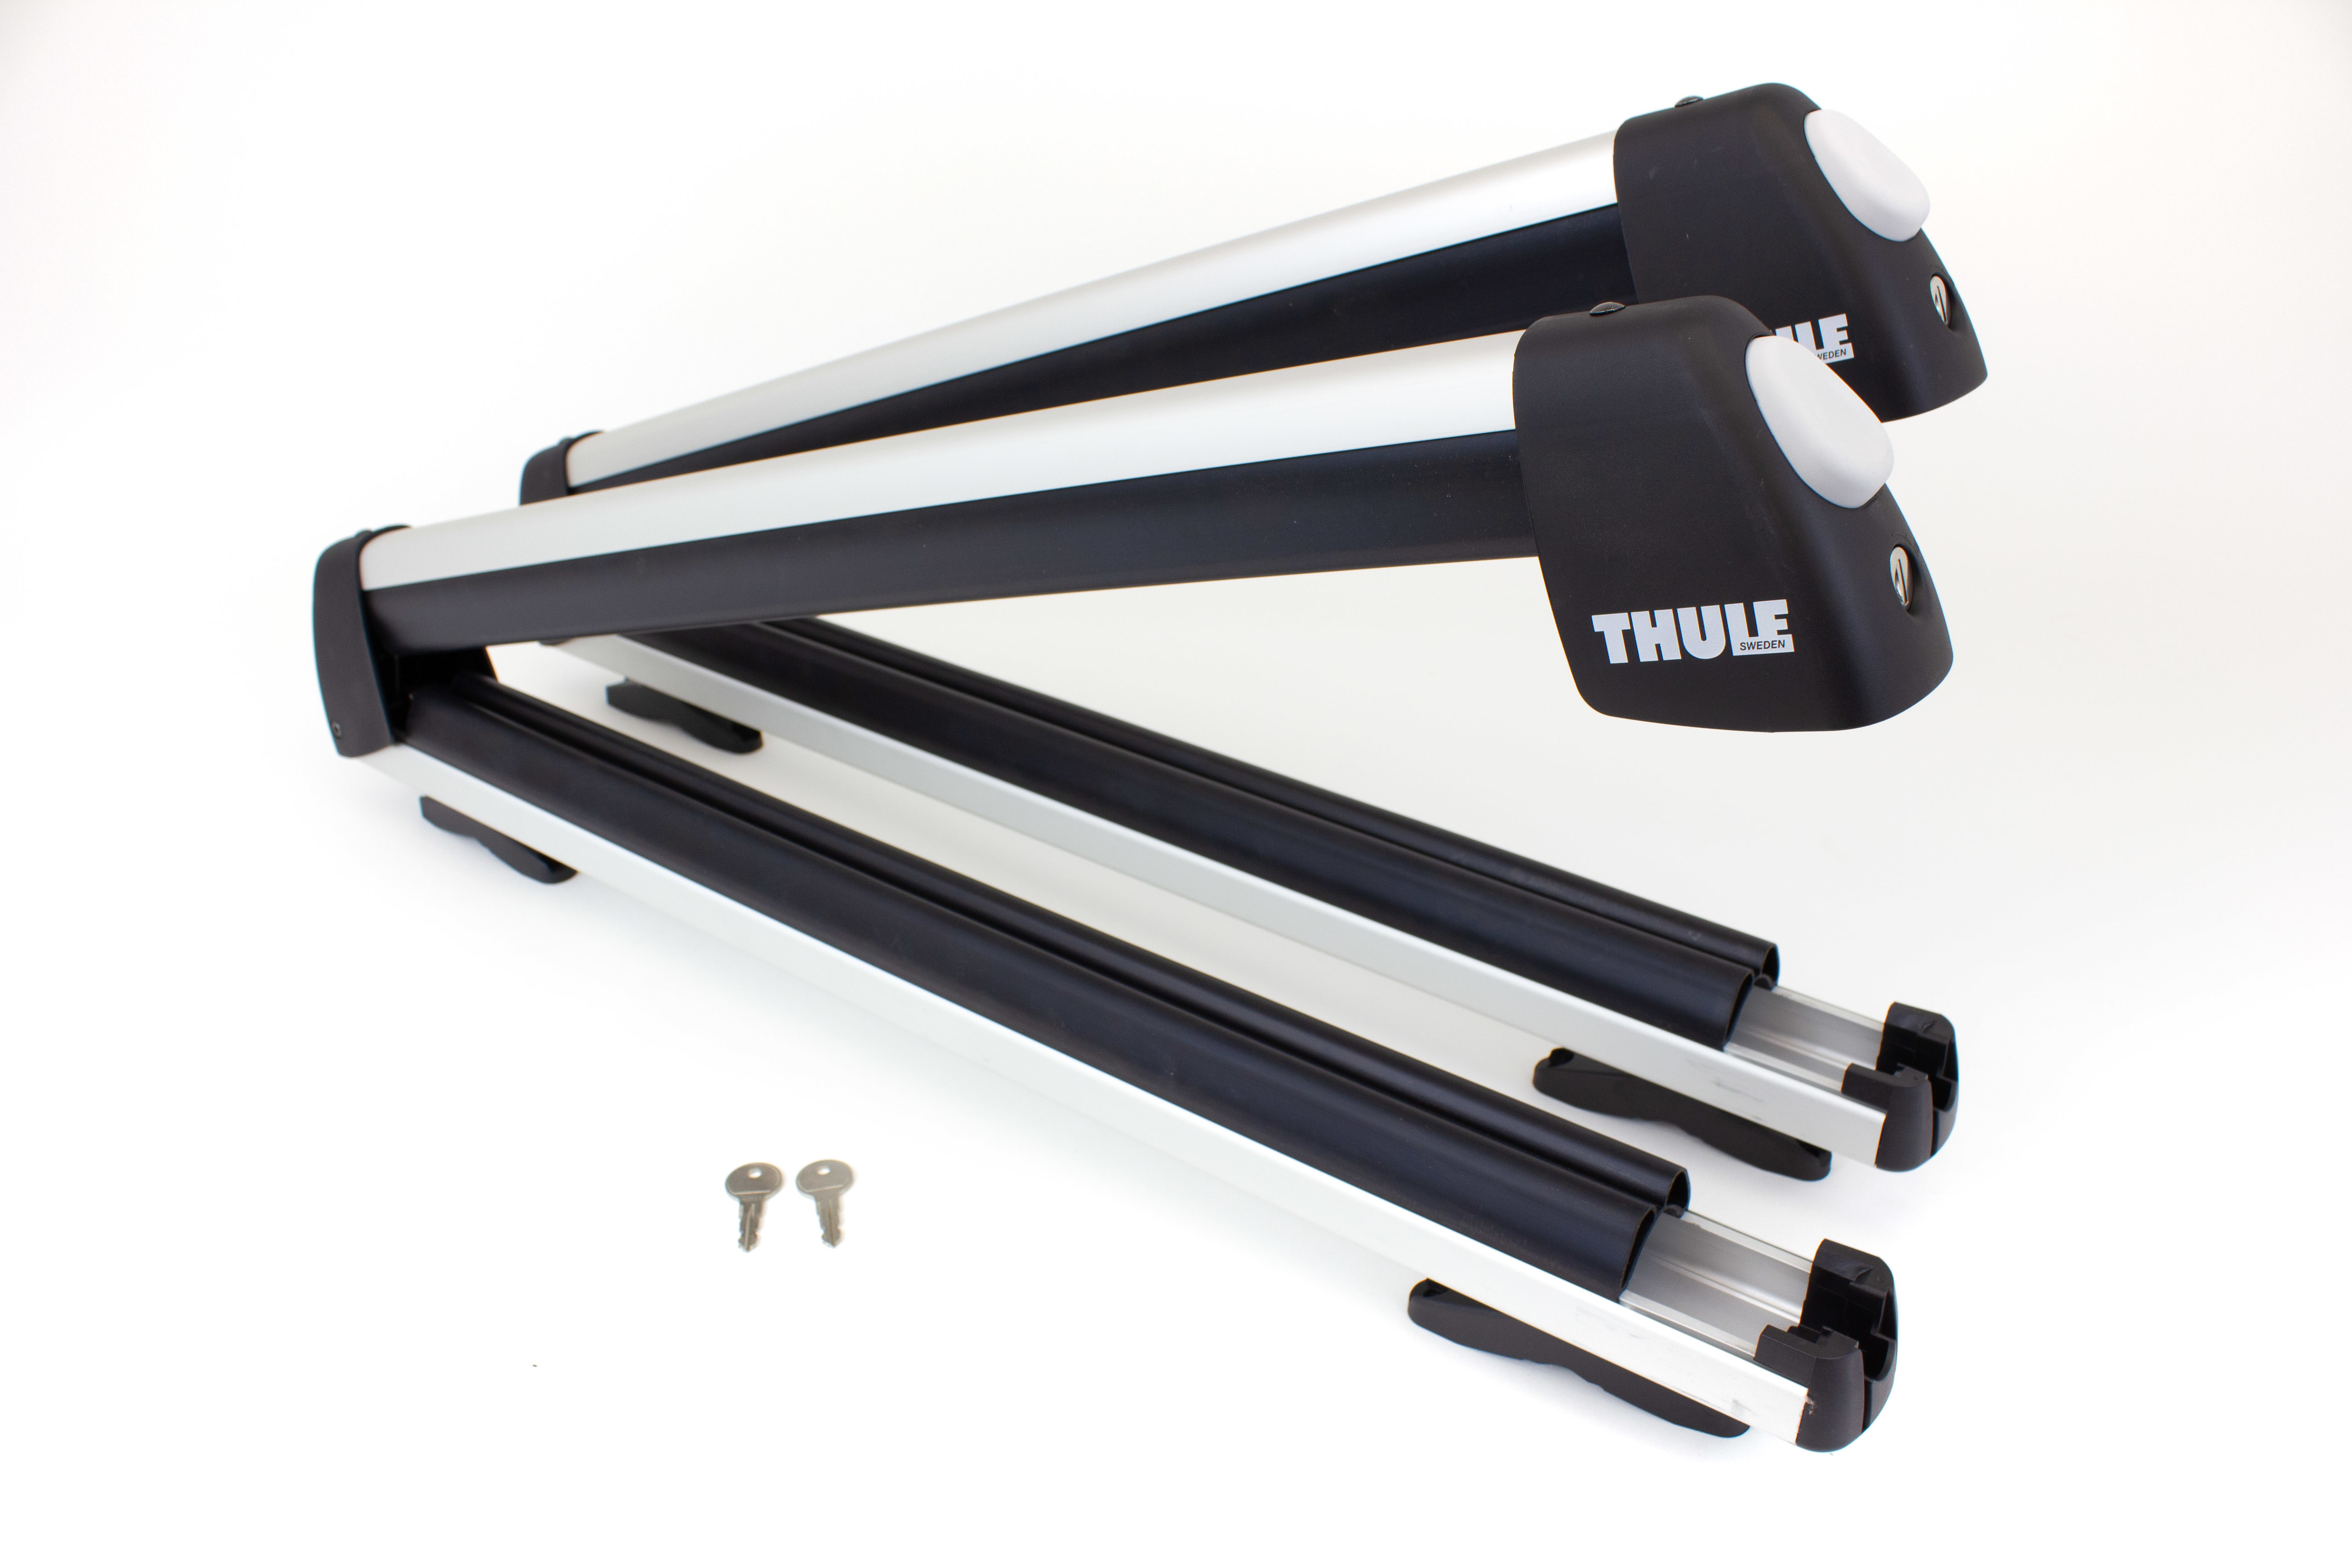 Thule 91725U Universal Flat Top 6-Ski Carrier Questions & Answers